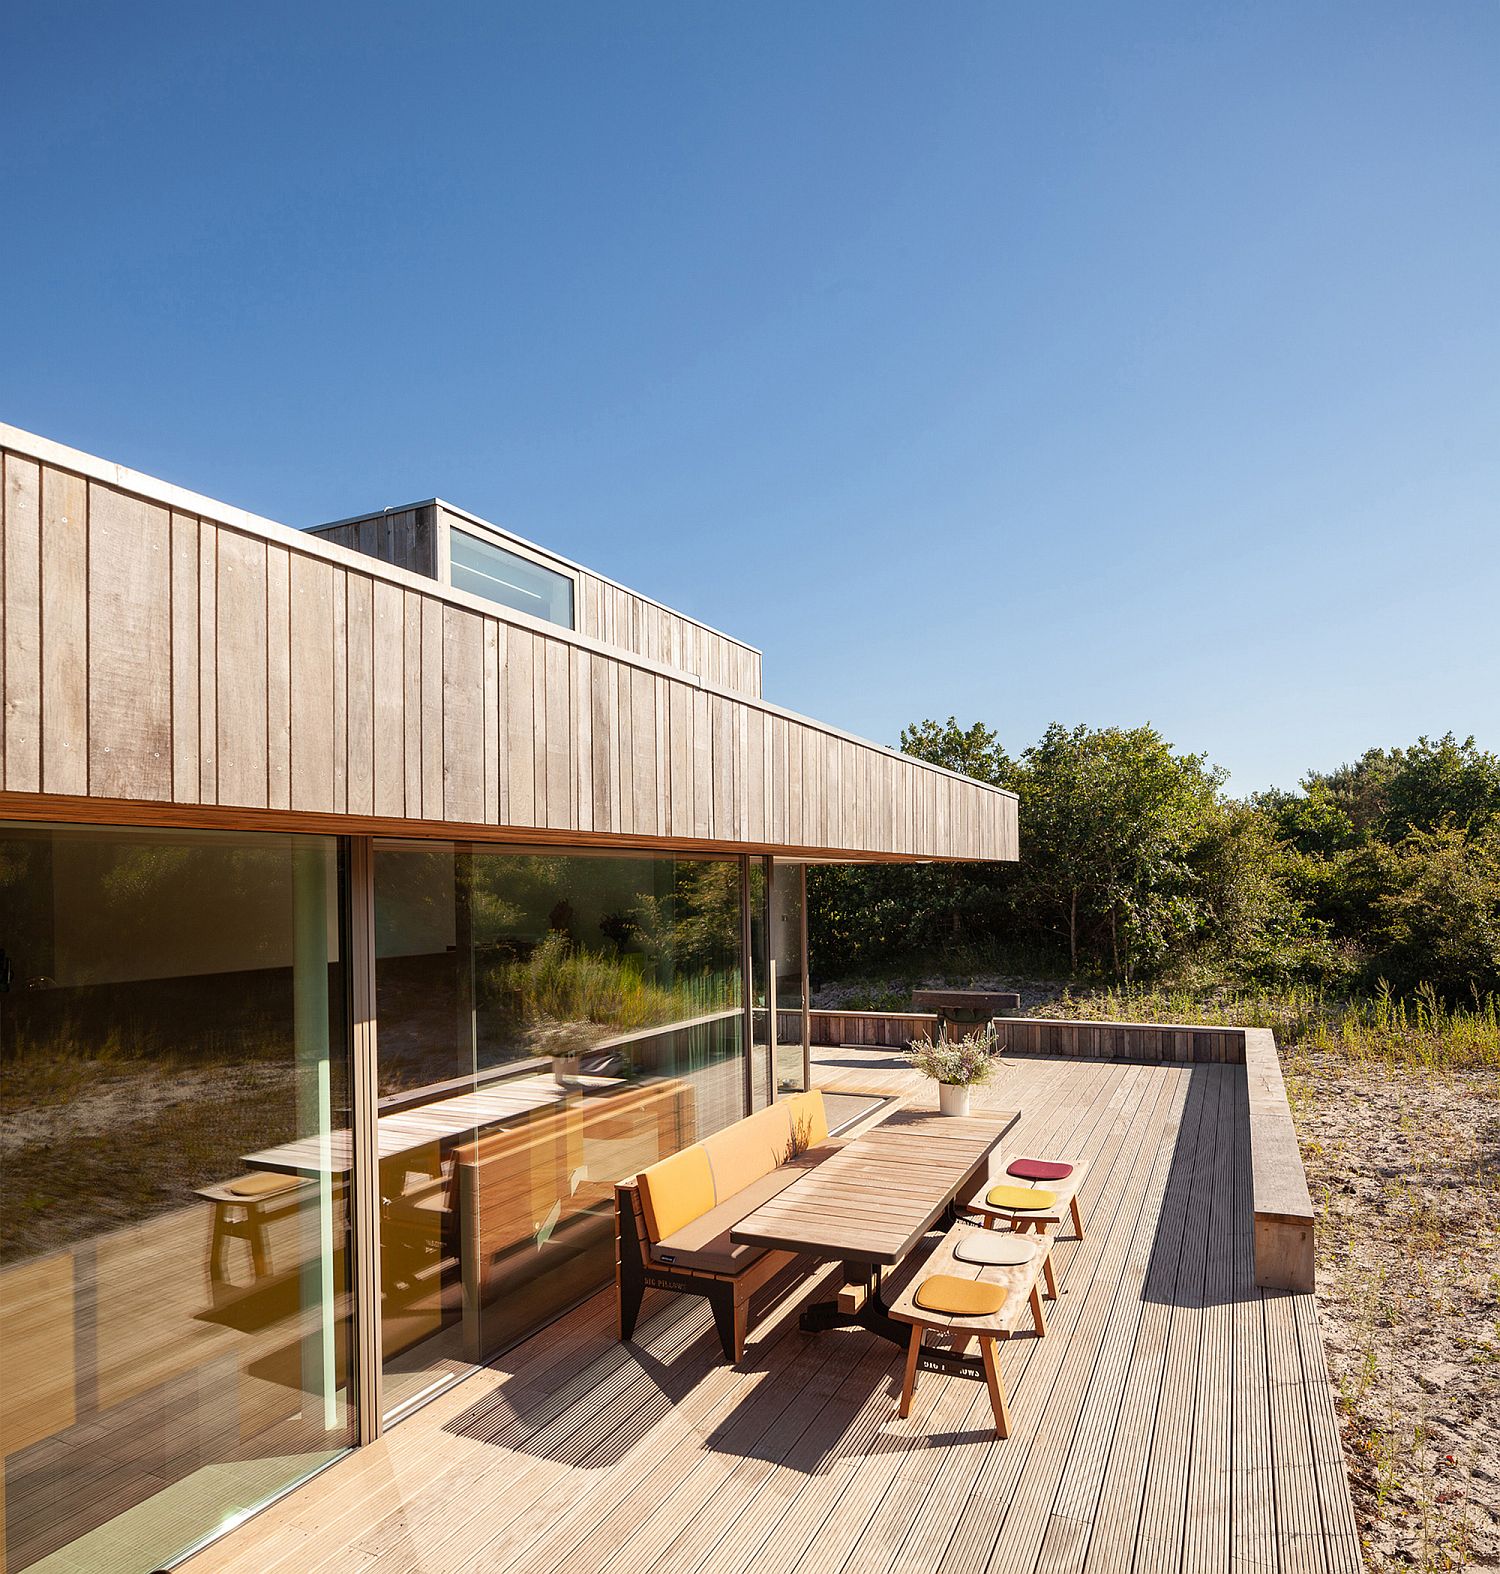 Sweeping wooden deck outside offers connectivity with nature